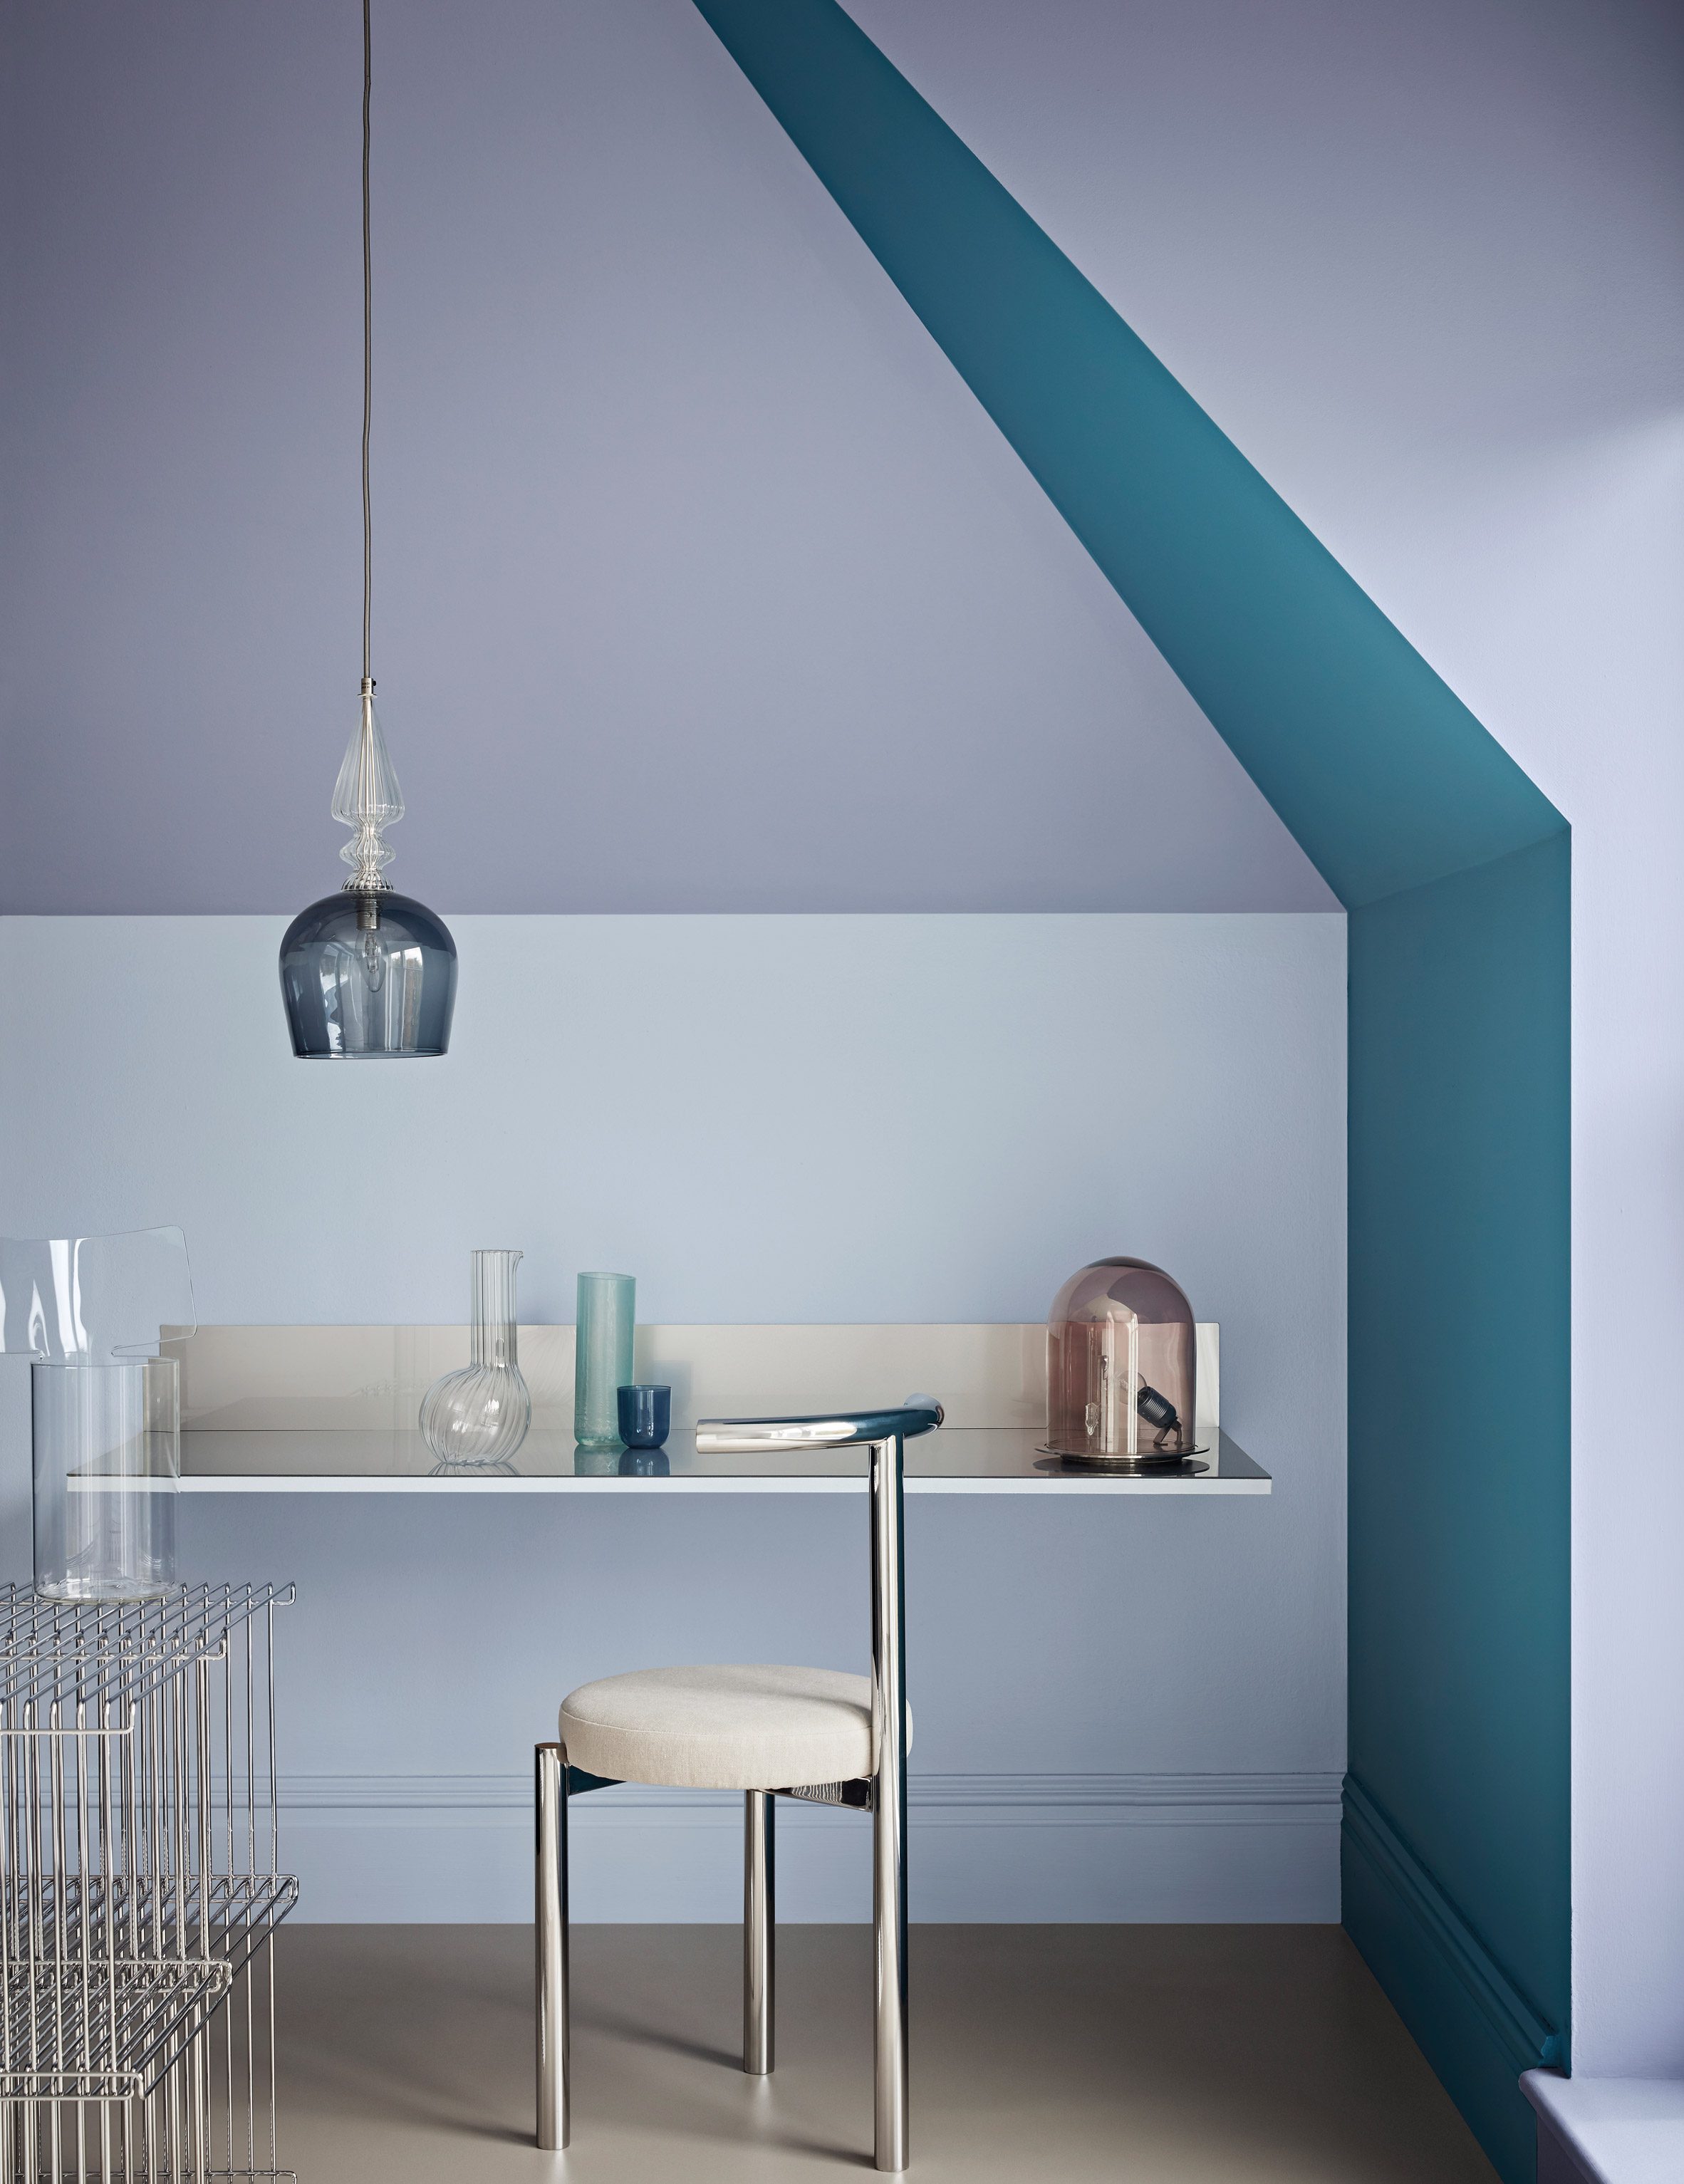 Desk nook with transparent, crystal-like objects and metal furniture against pale blue, grey and teal walls